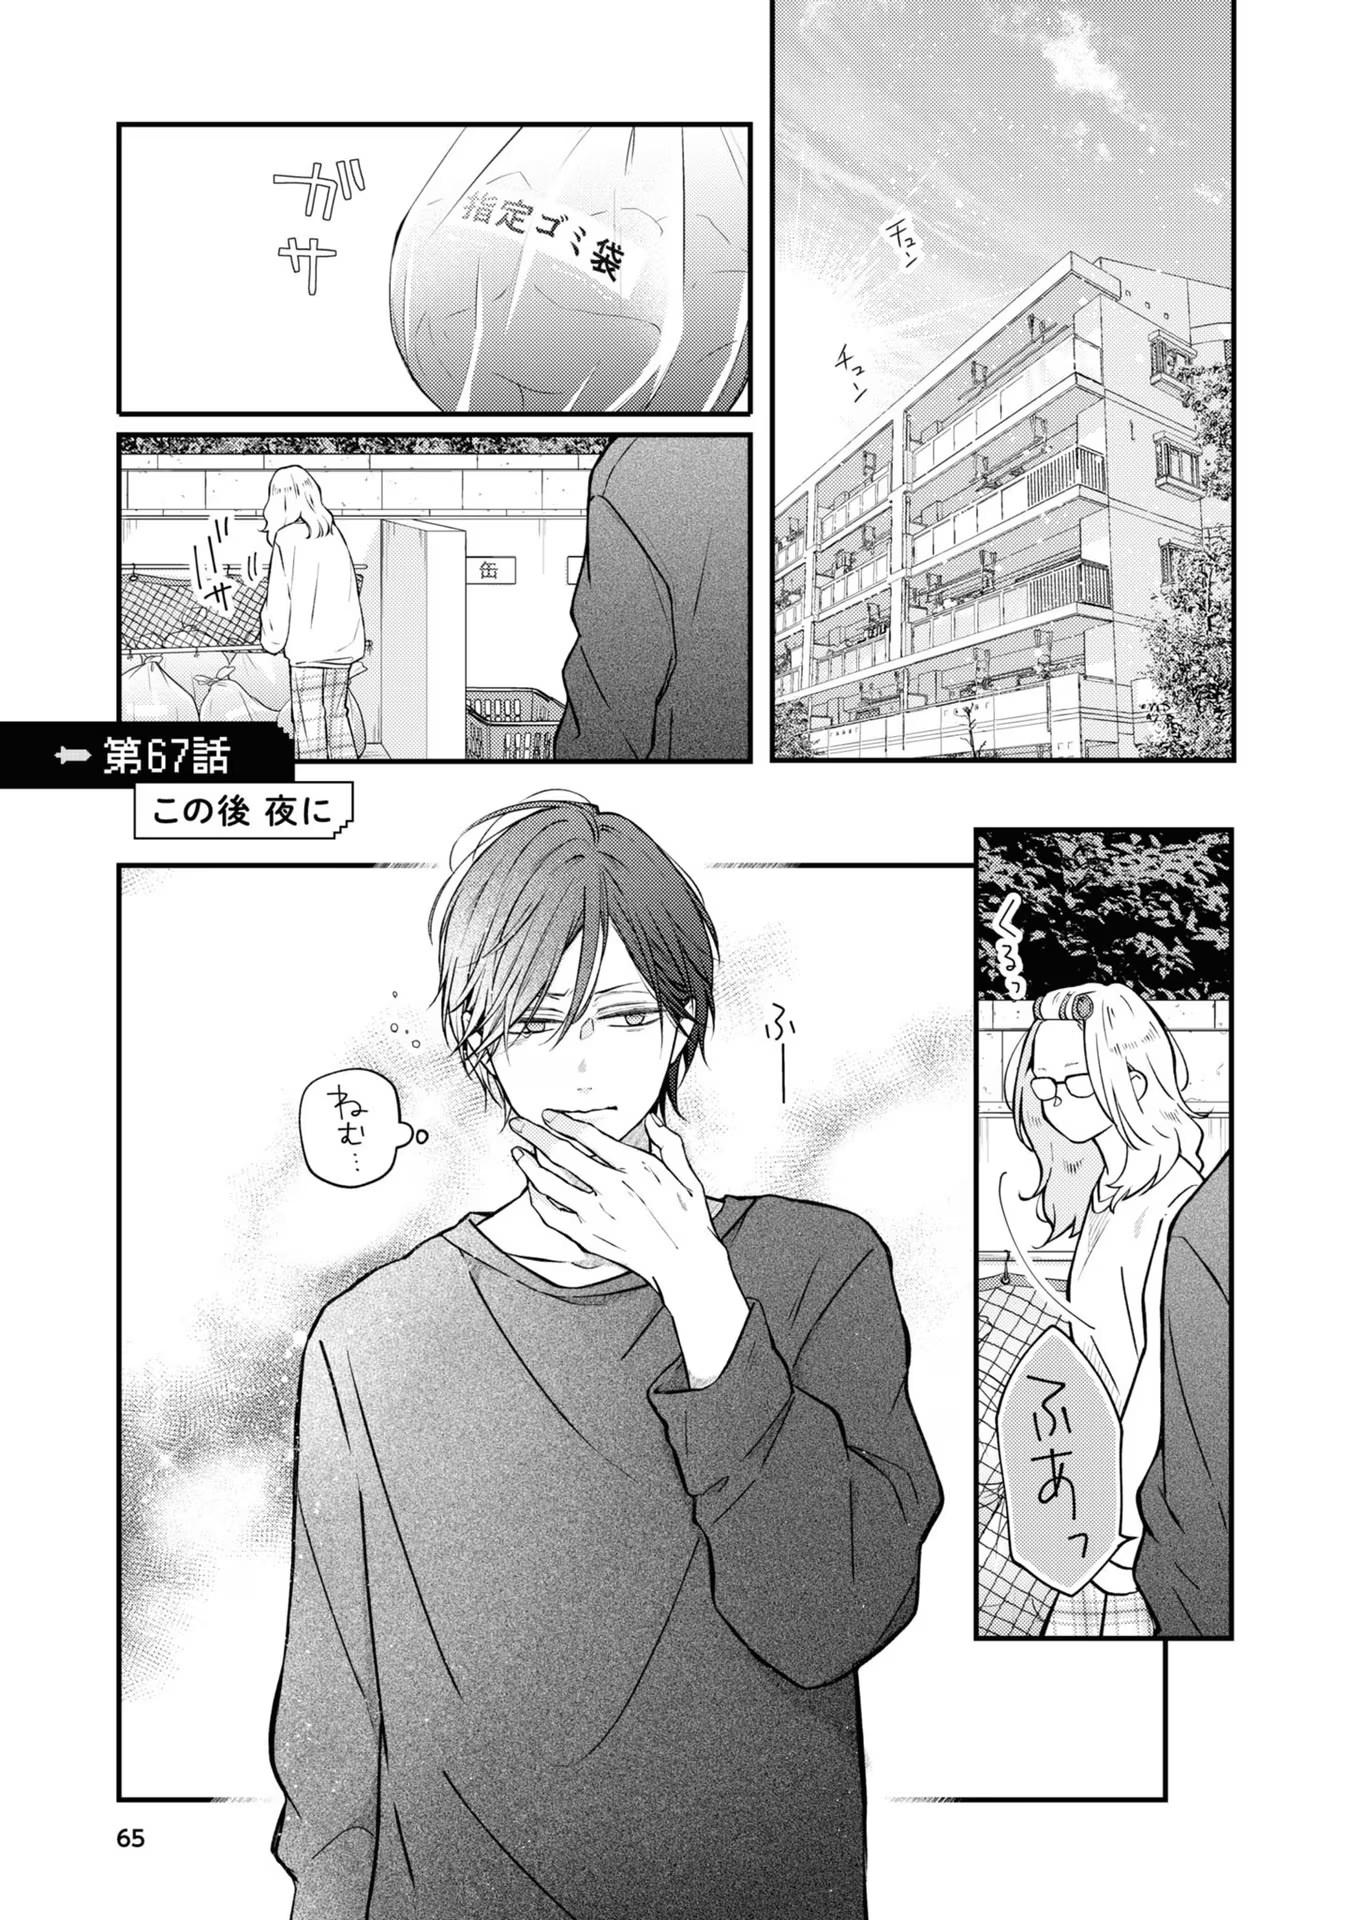 Volume 1/Extra Chapter, My Love Story with Yamada-kun at Lv999